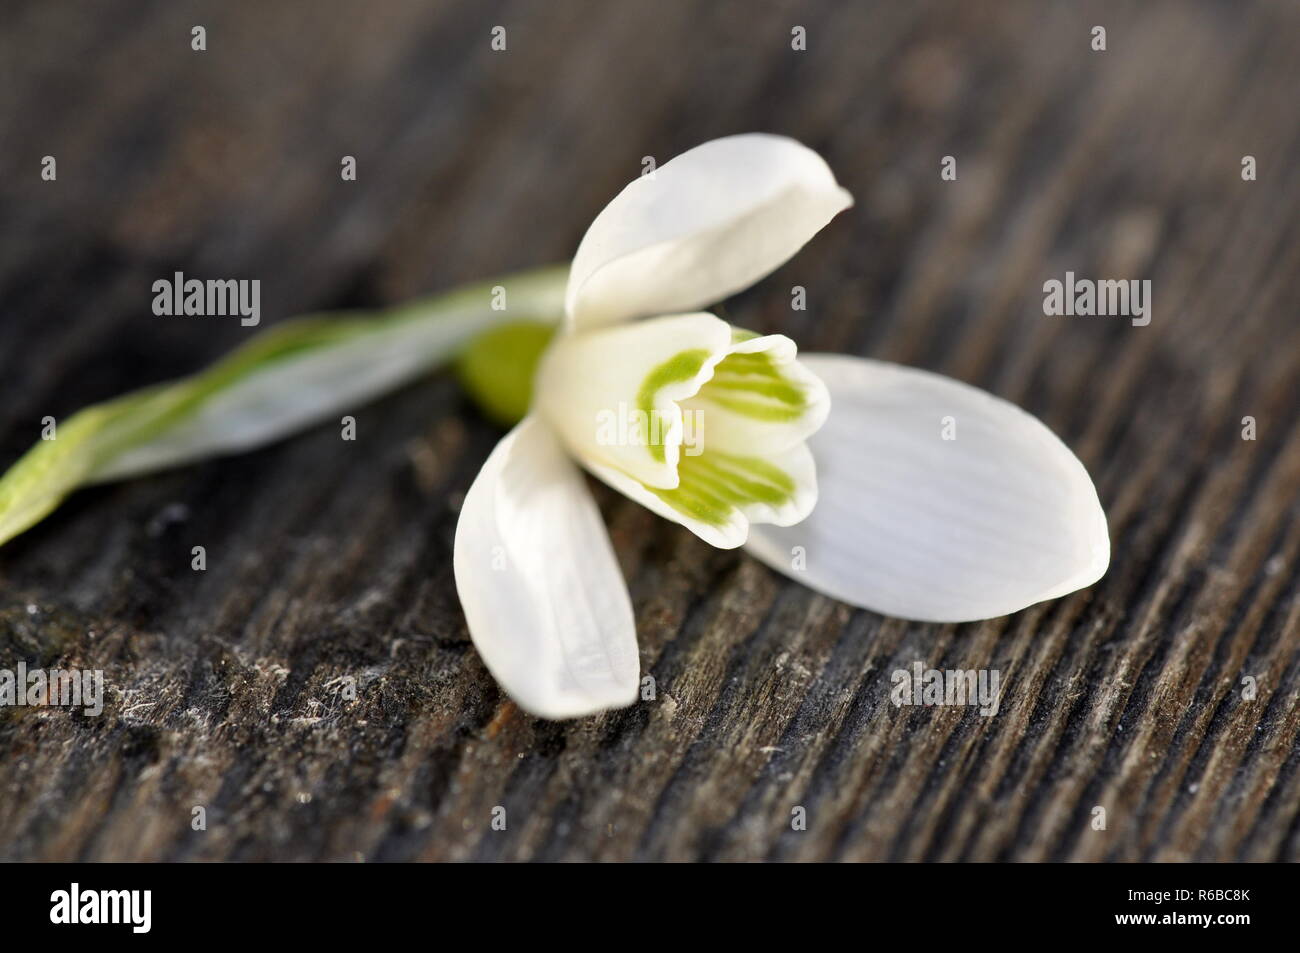 Snowdrop flower Galanthus nivalis on a table Stock Photo